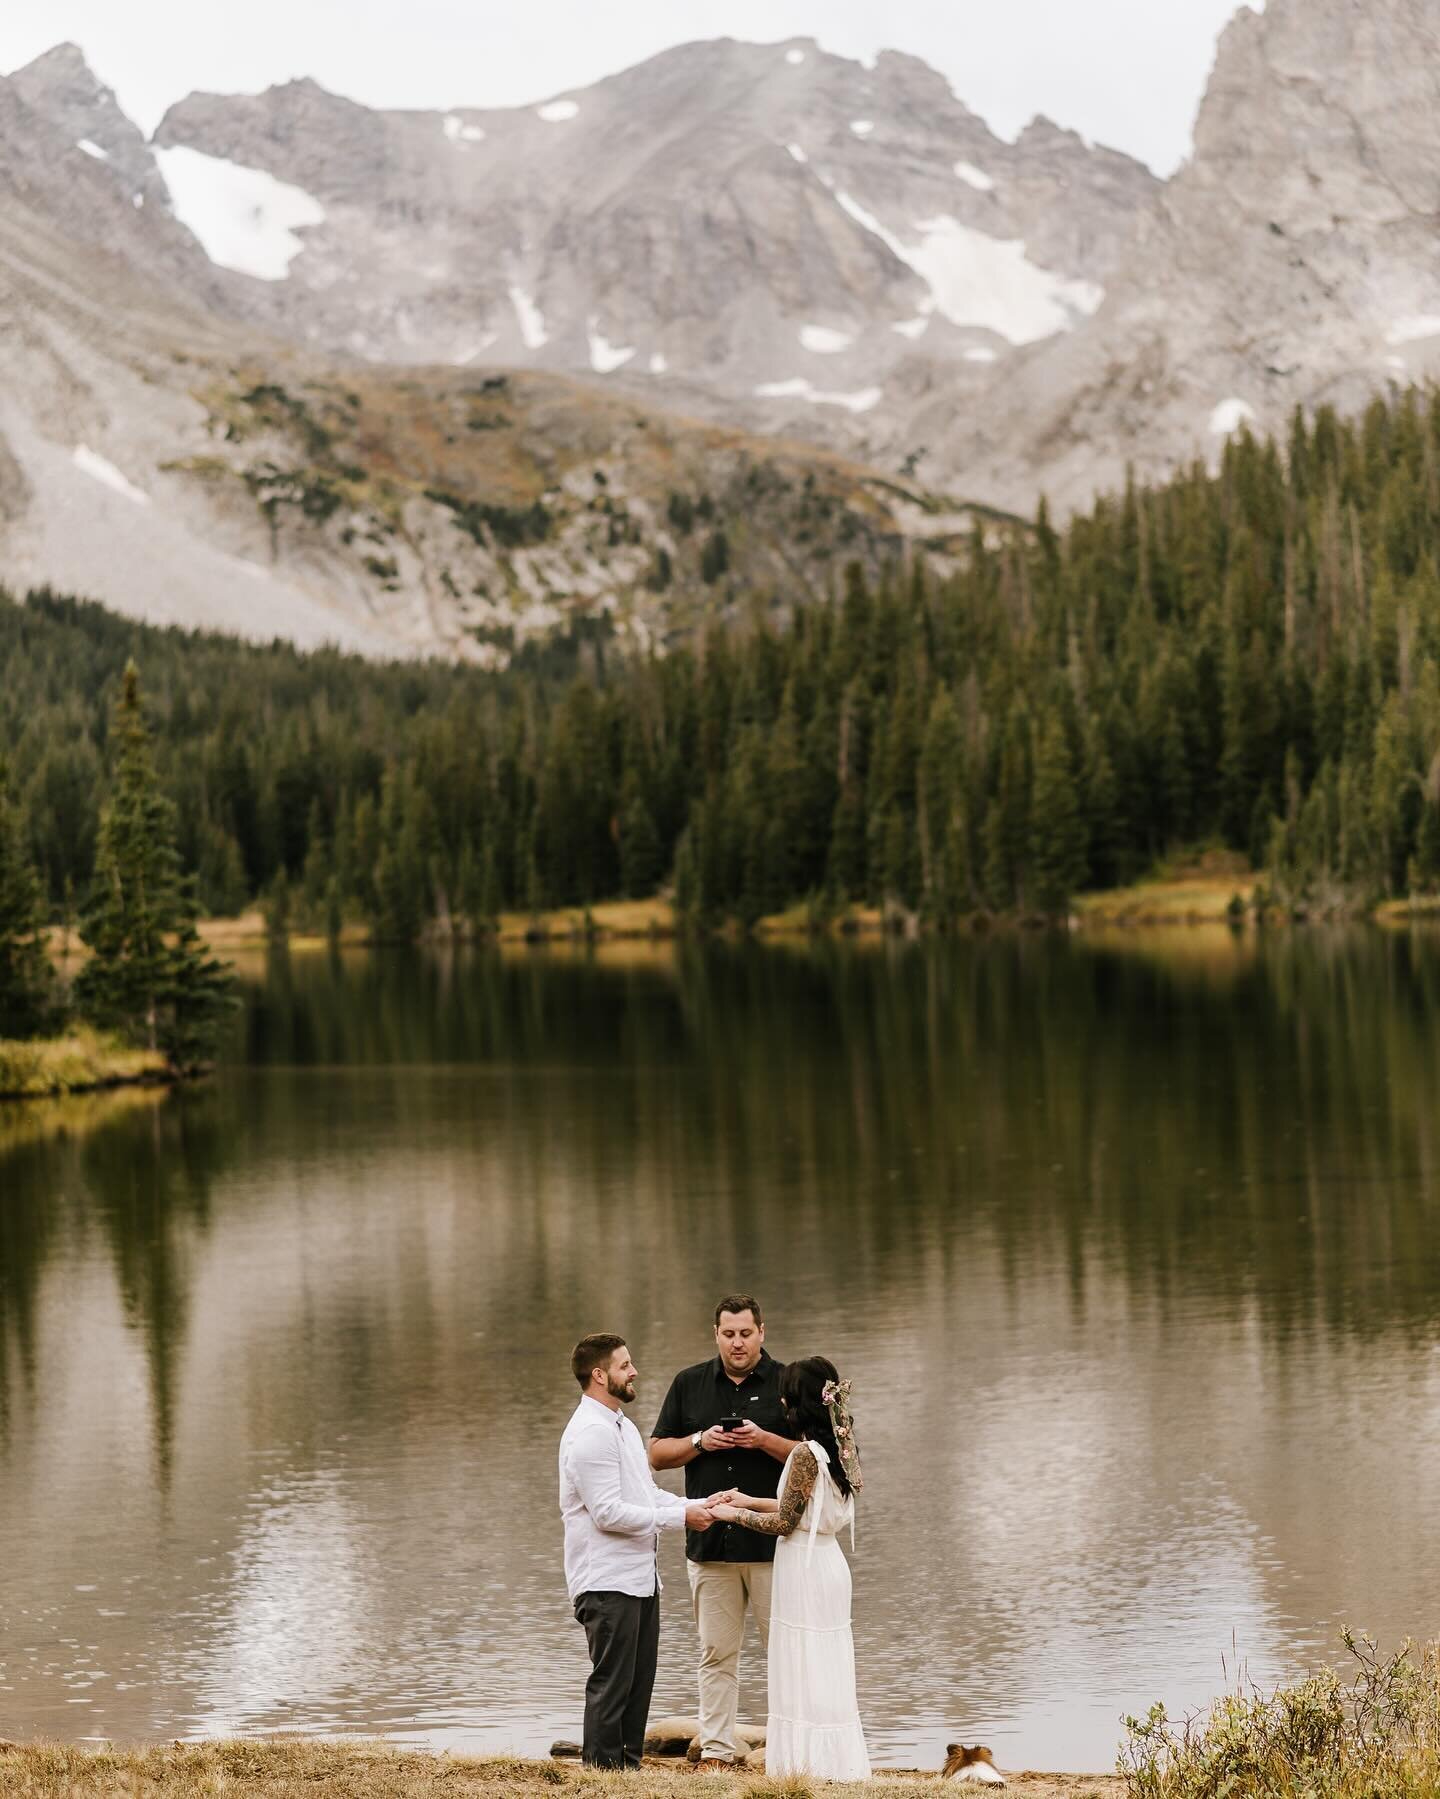 Imagine you, your partner, your dogs, and some beers saying your vows in front of this view. Oh wait, you don&rsquo;t have to imagine it.

#coloradoelopement #elopementphotography #elopementphotographer #mountainelopement #intimateelopement #destinat